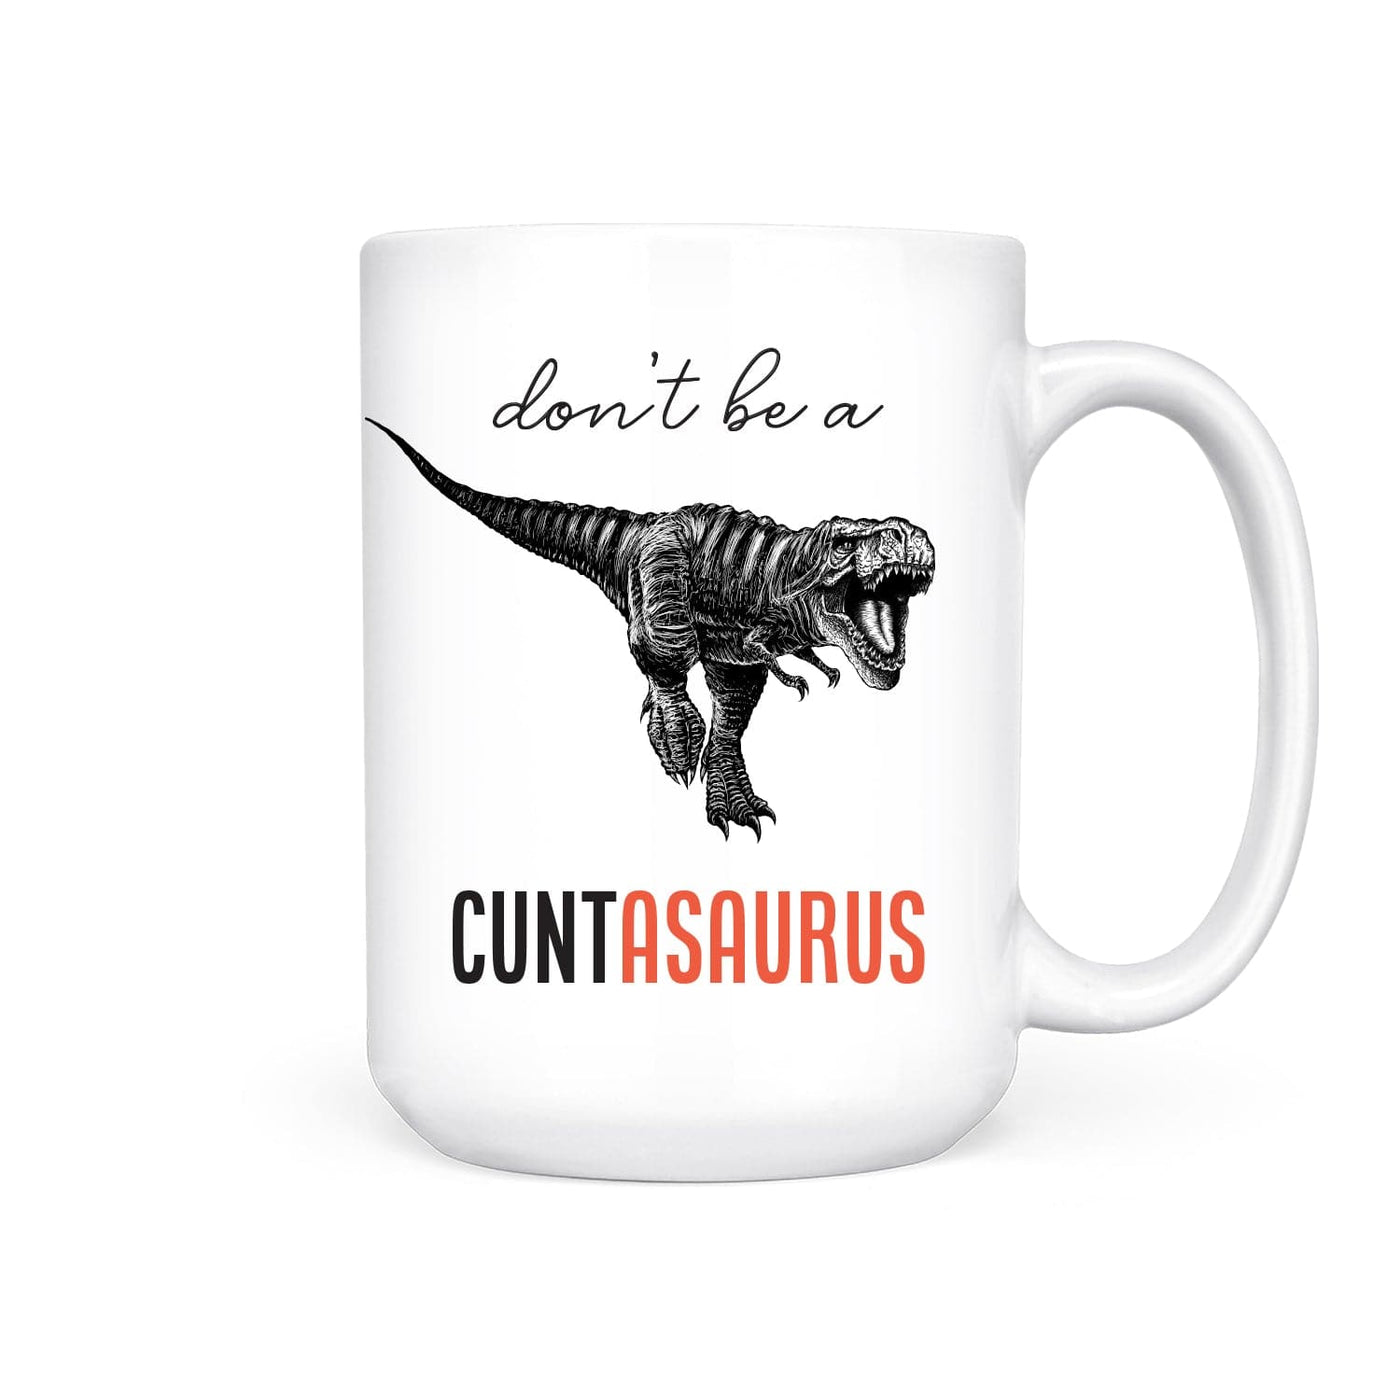 Cuntasarus | Mug - The Local Space